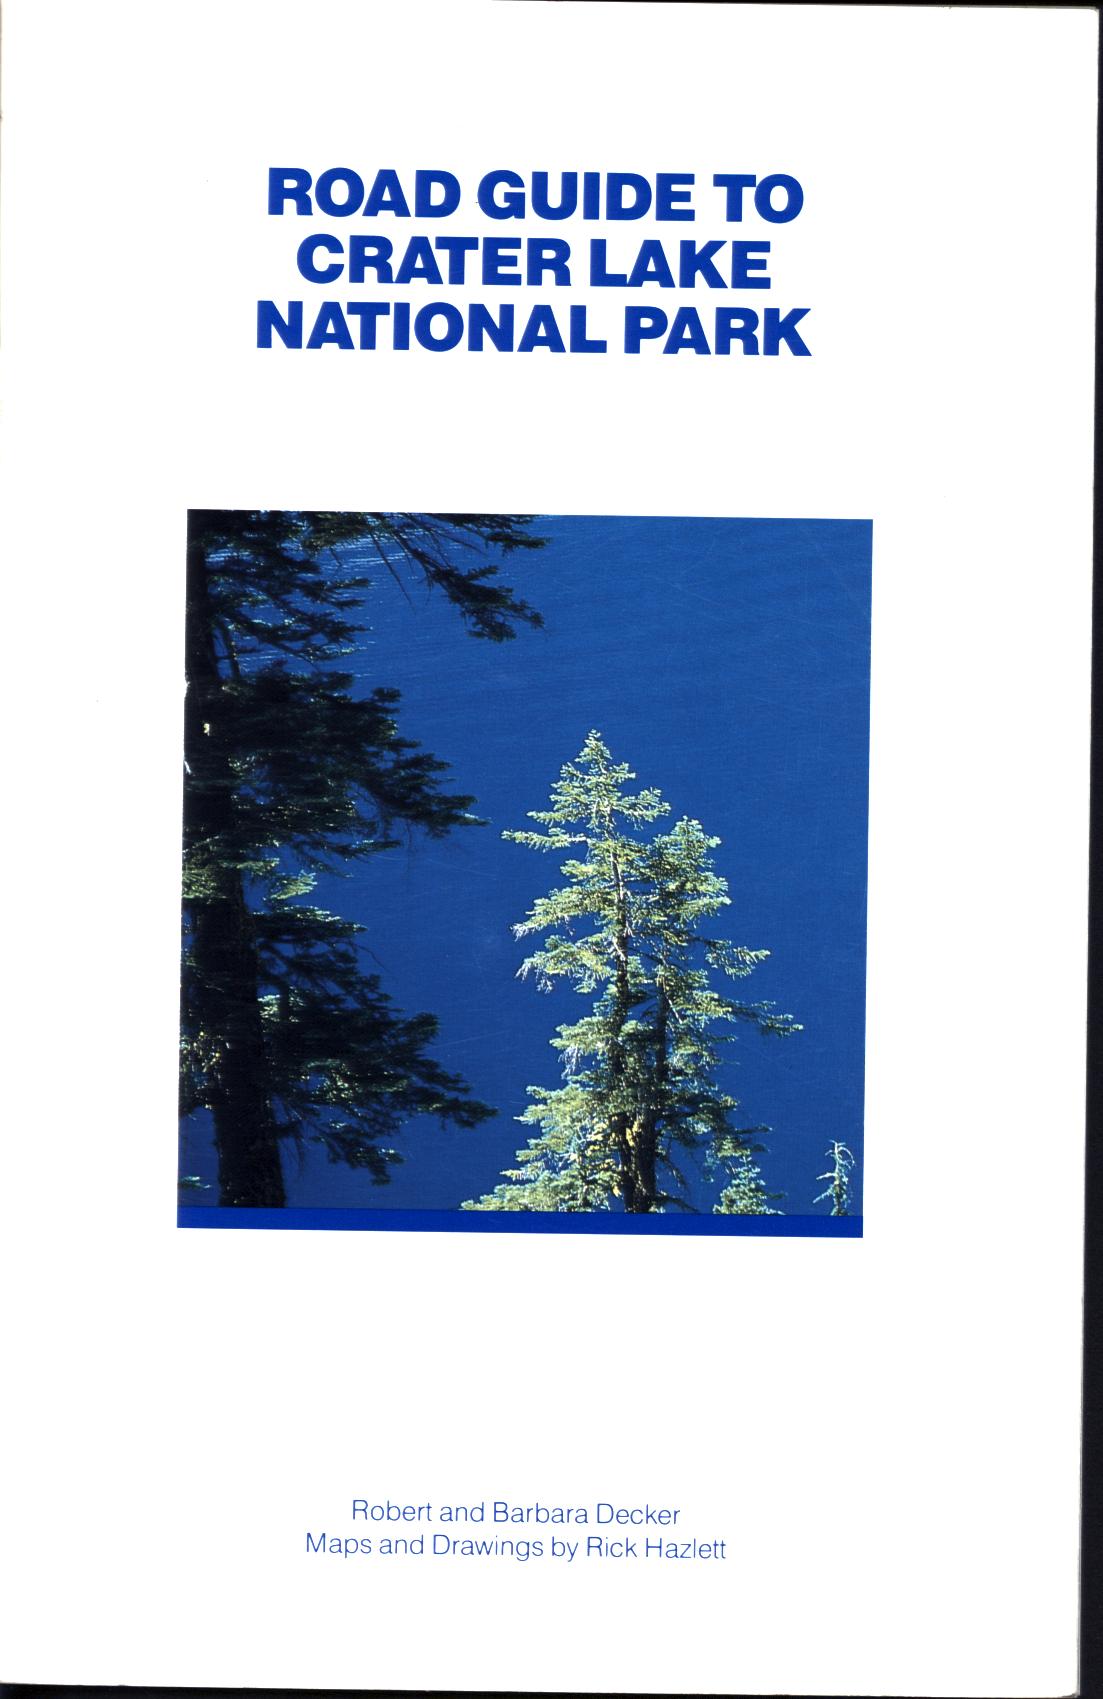 ROAD GUIDE TO CRATER LAKE NATIONAL PARK (OR). 